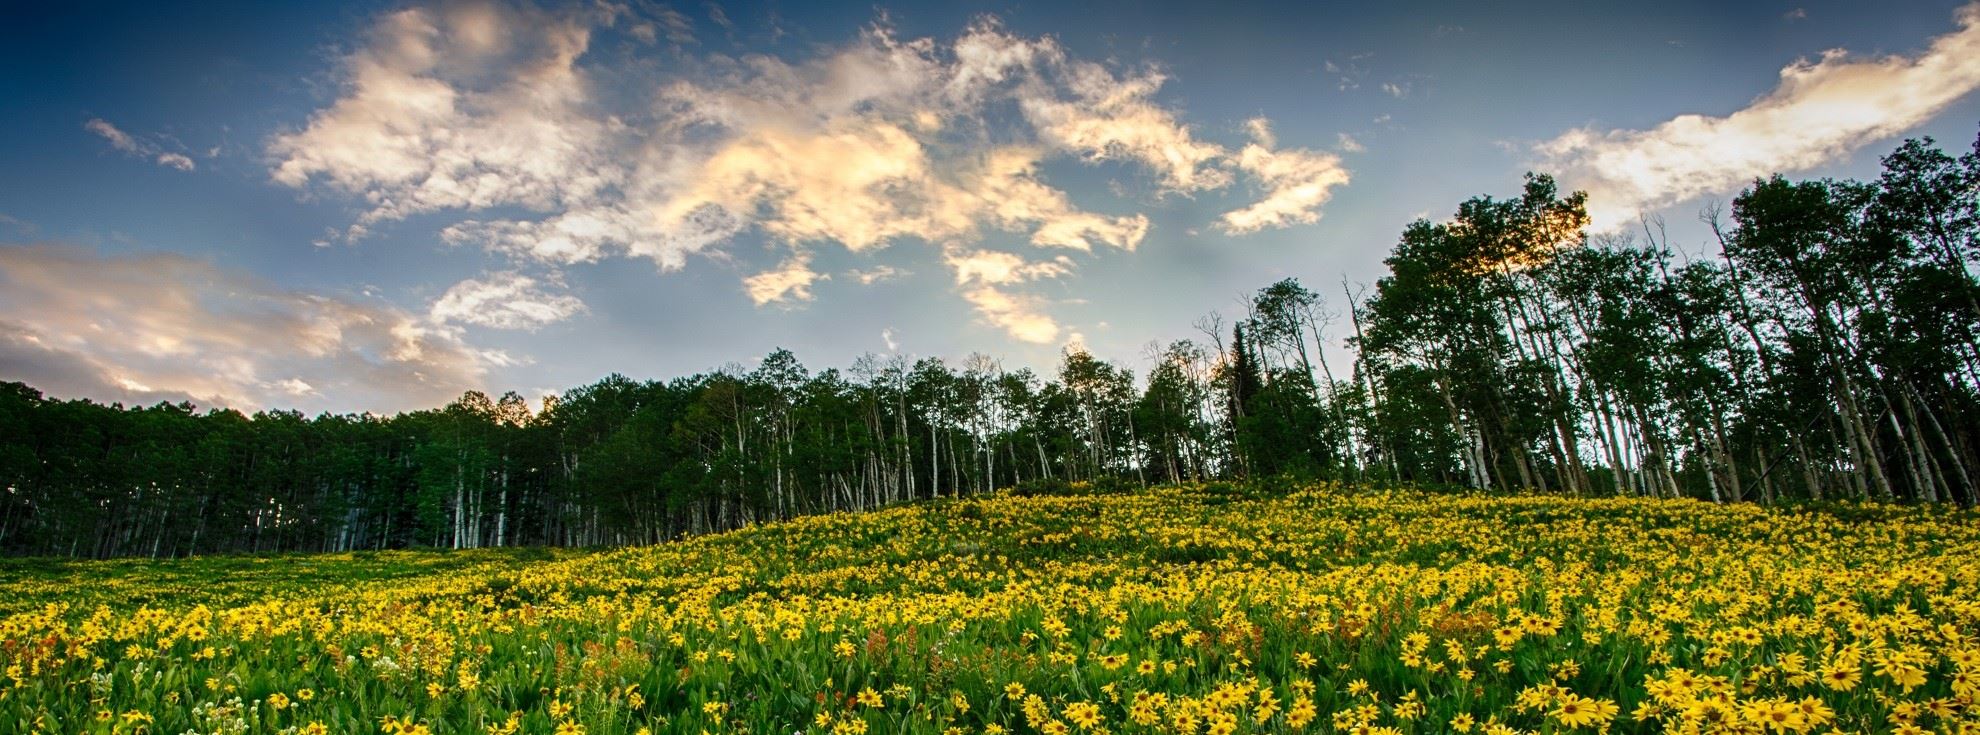 Yellow flowers in a green meadow with a blue sky in the background